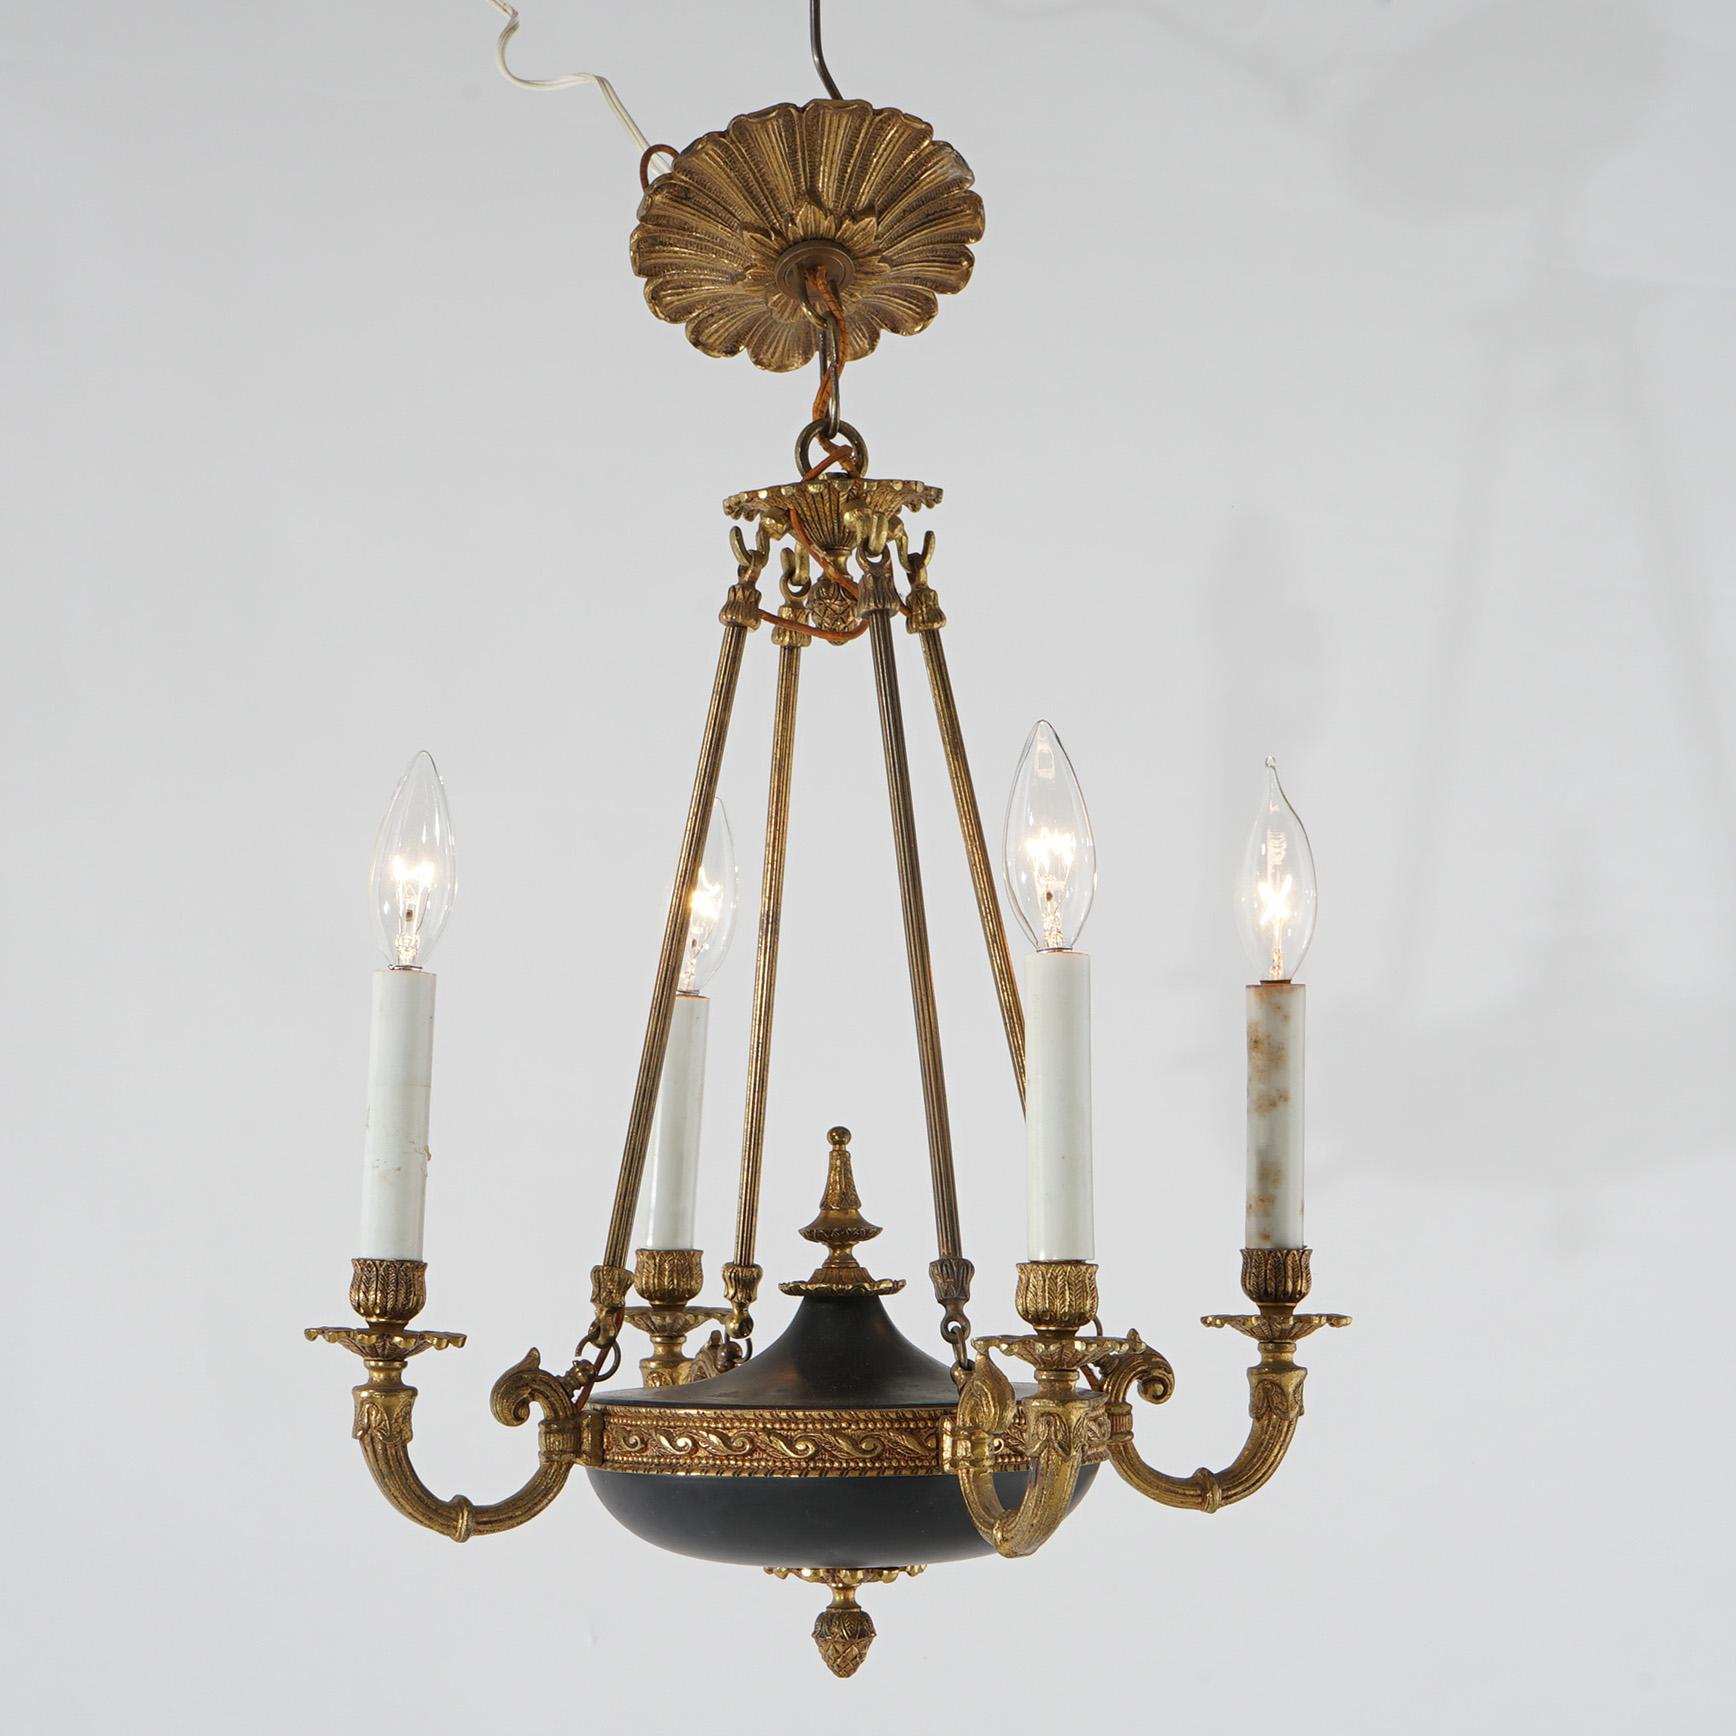 French Empire Ebonized & Gilt Metal Four-Light Pan Chandelier 20th C In Good Condition For Sale In Big Flats, NY